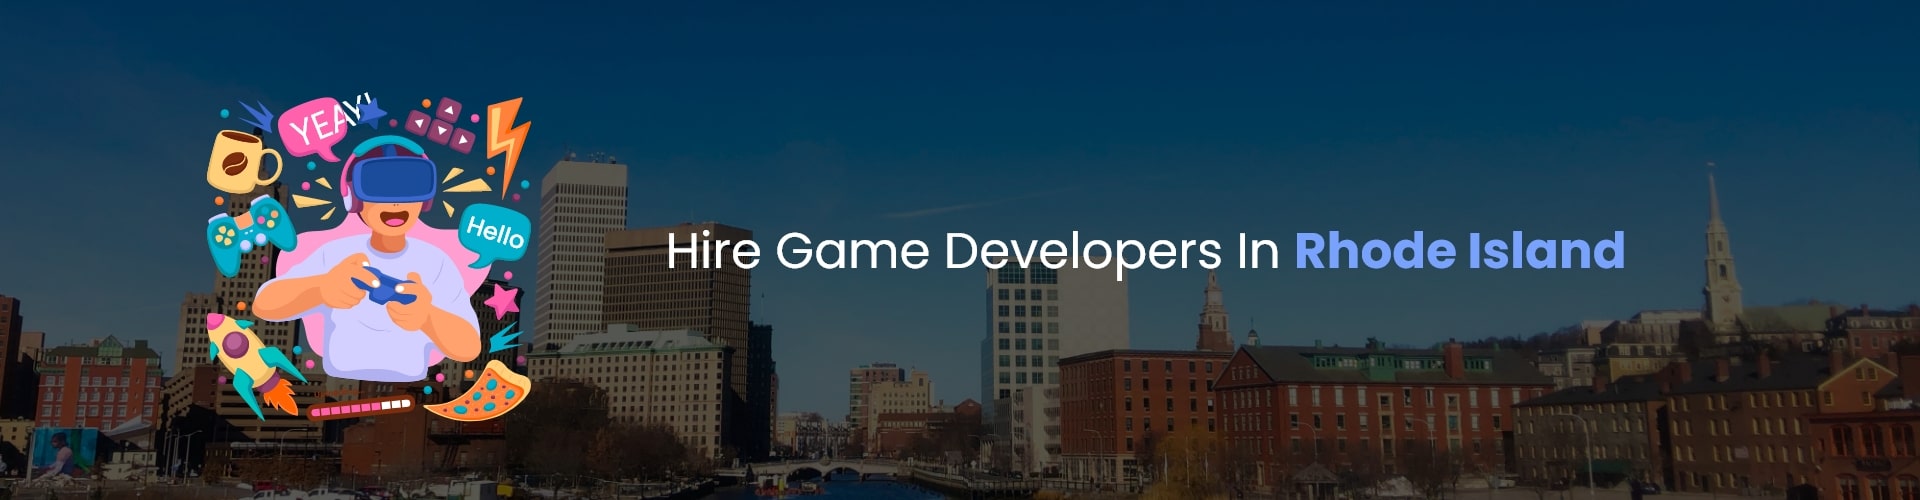 hire game developers in rhode island